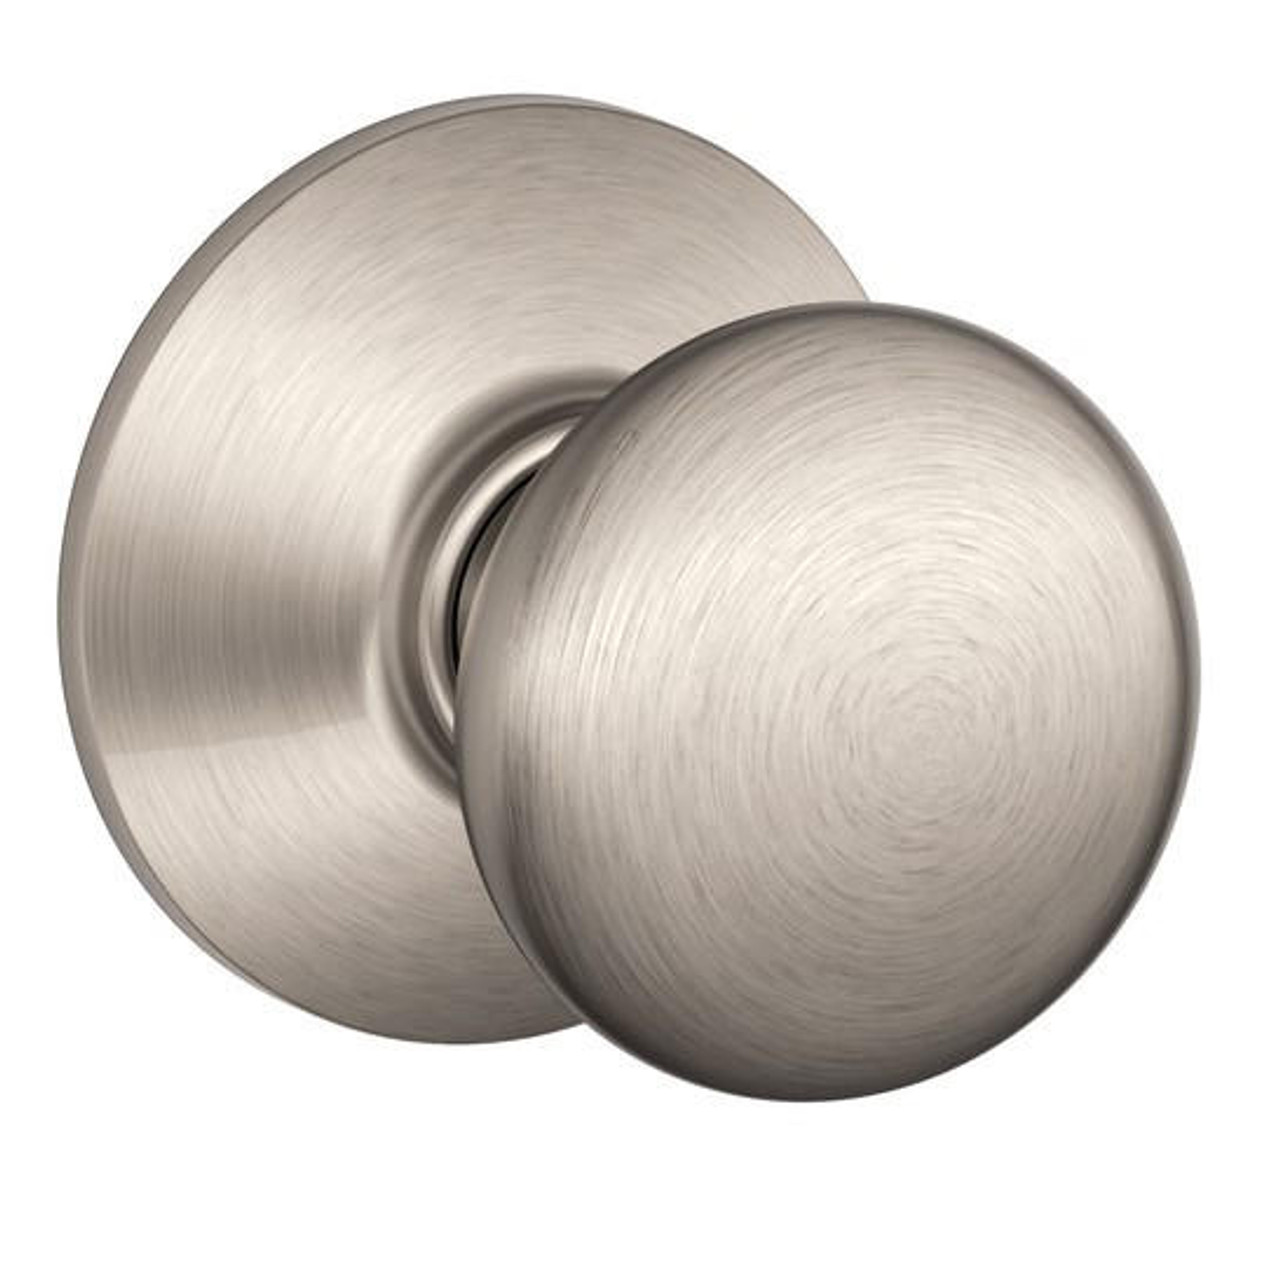  Schlage Lock F-Series Passage Knob Plymouth Series with a Standard Rosette 